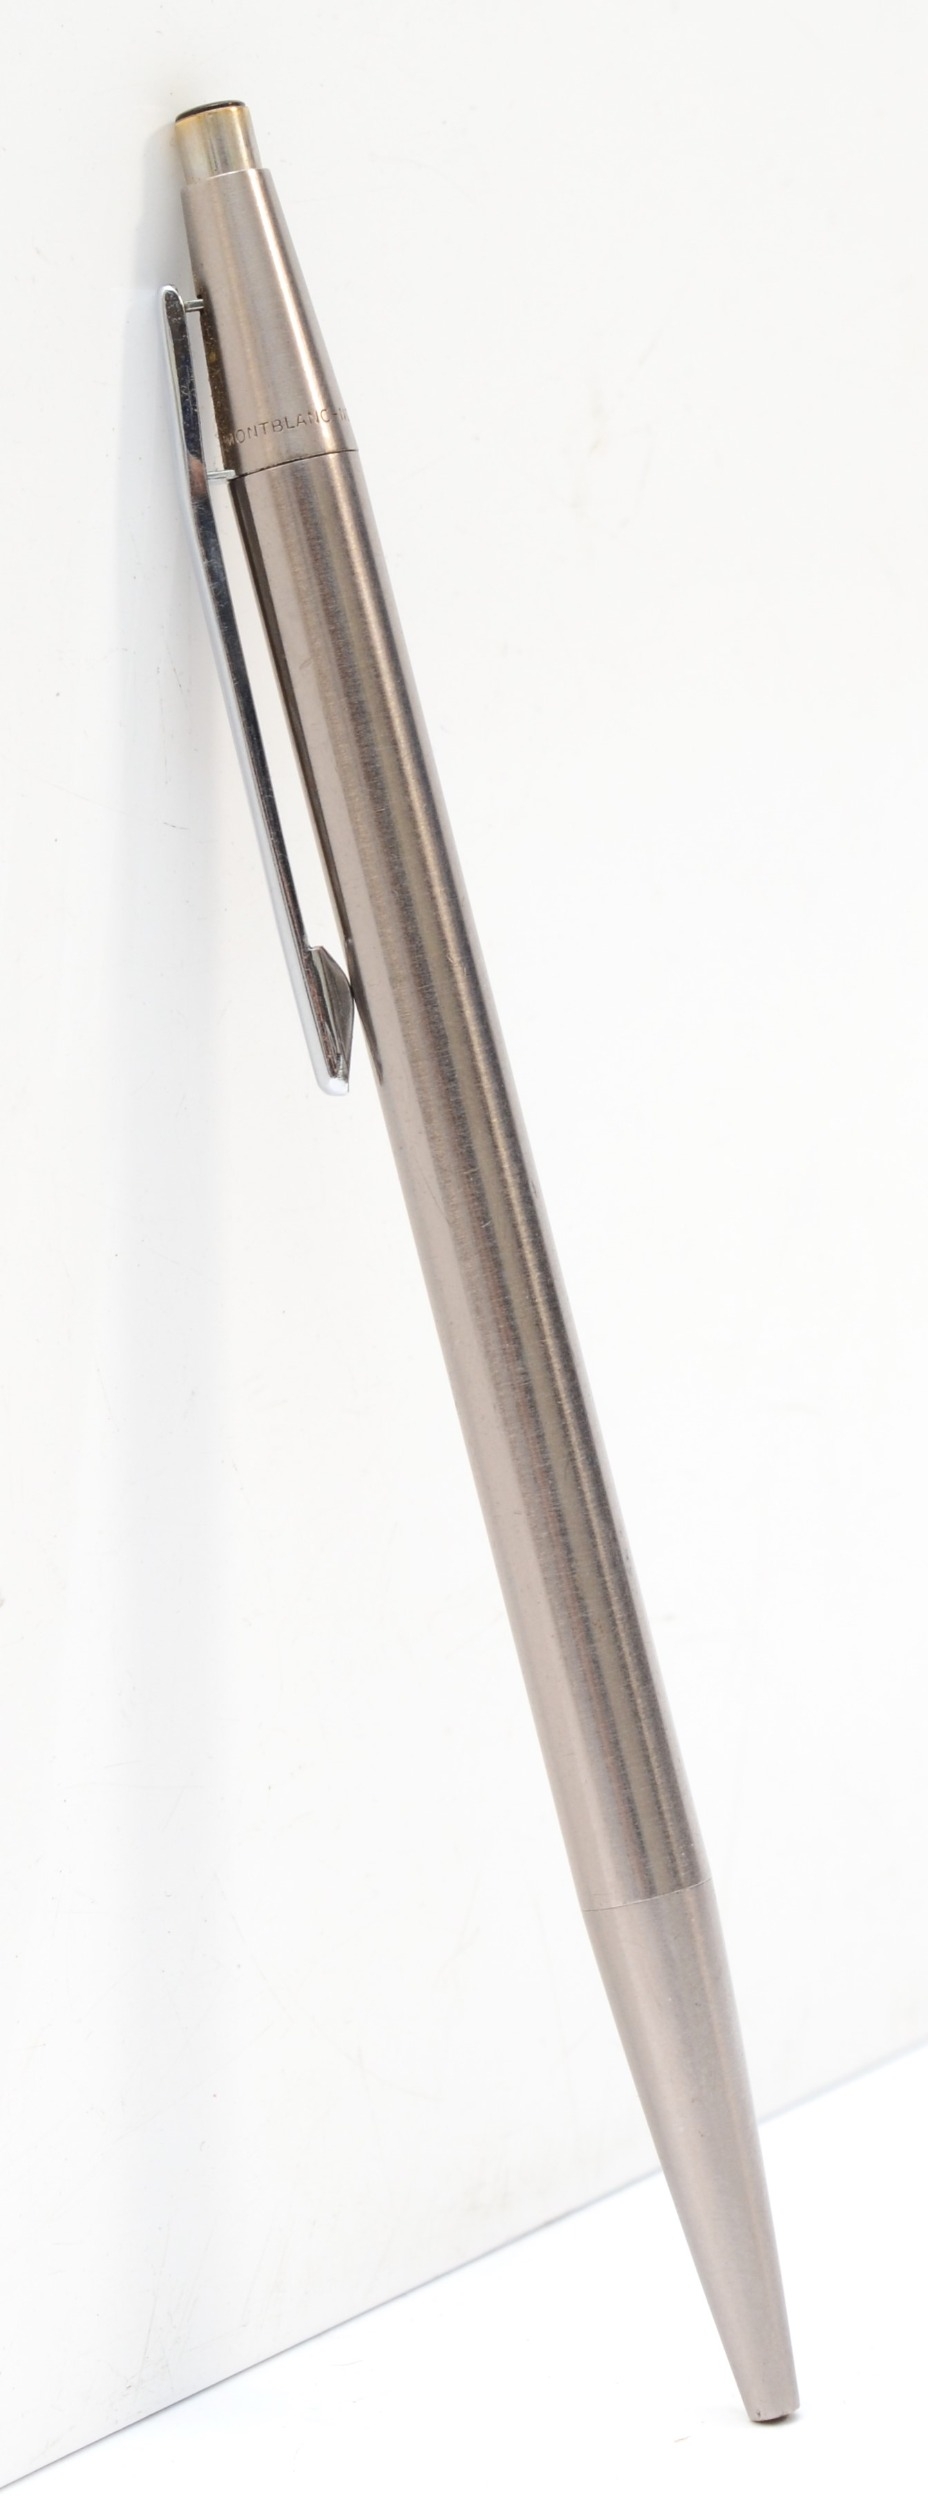 Montblanc, a stainless steel bodied Noblesse ball point pen, 13.5cm, the pen wont click to the on